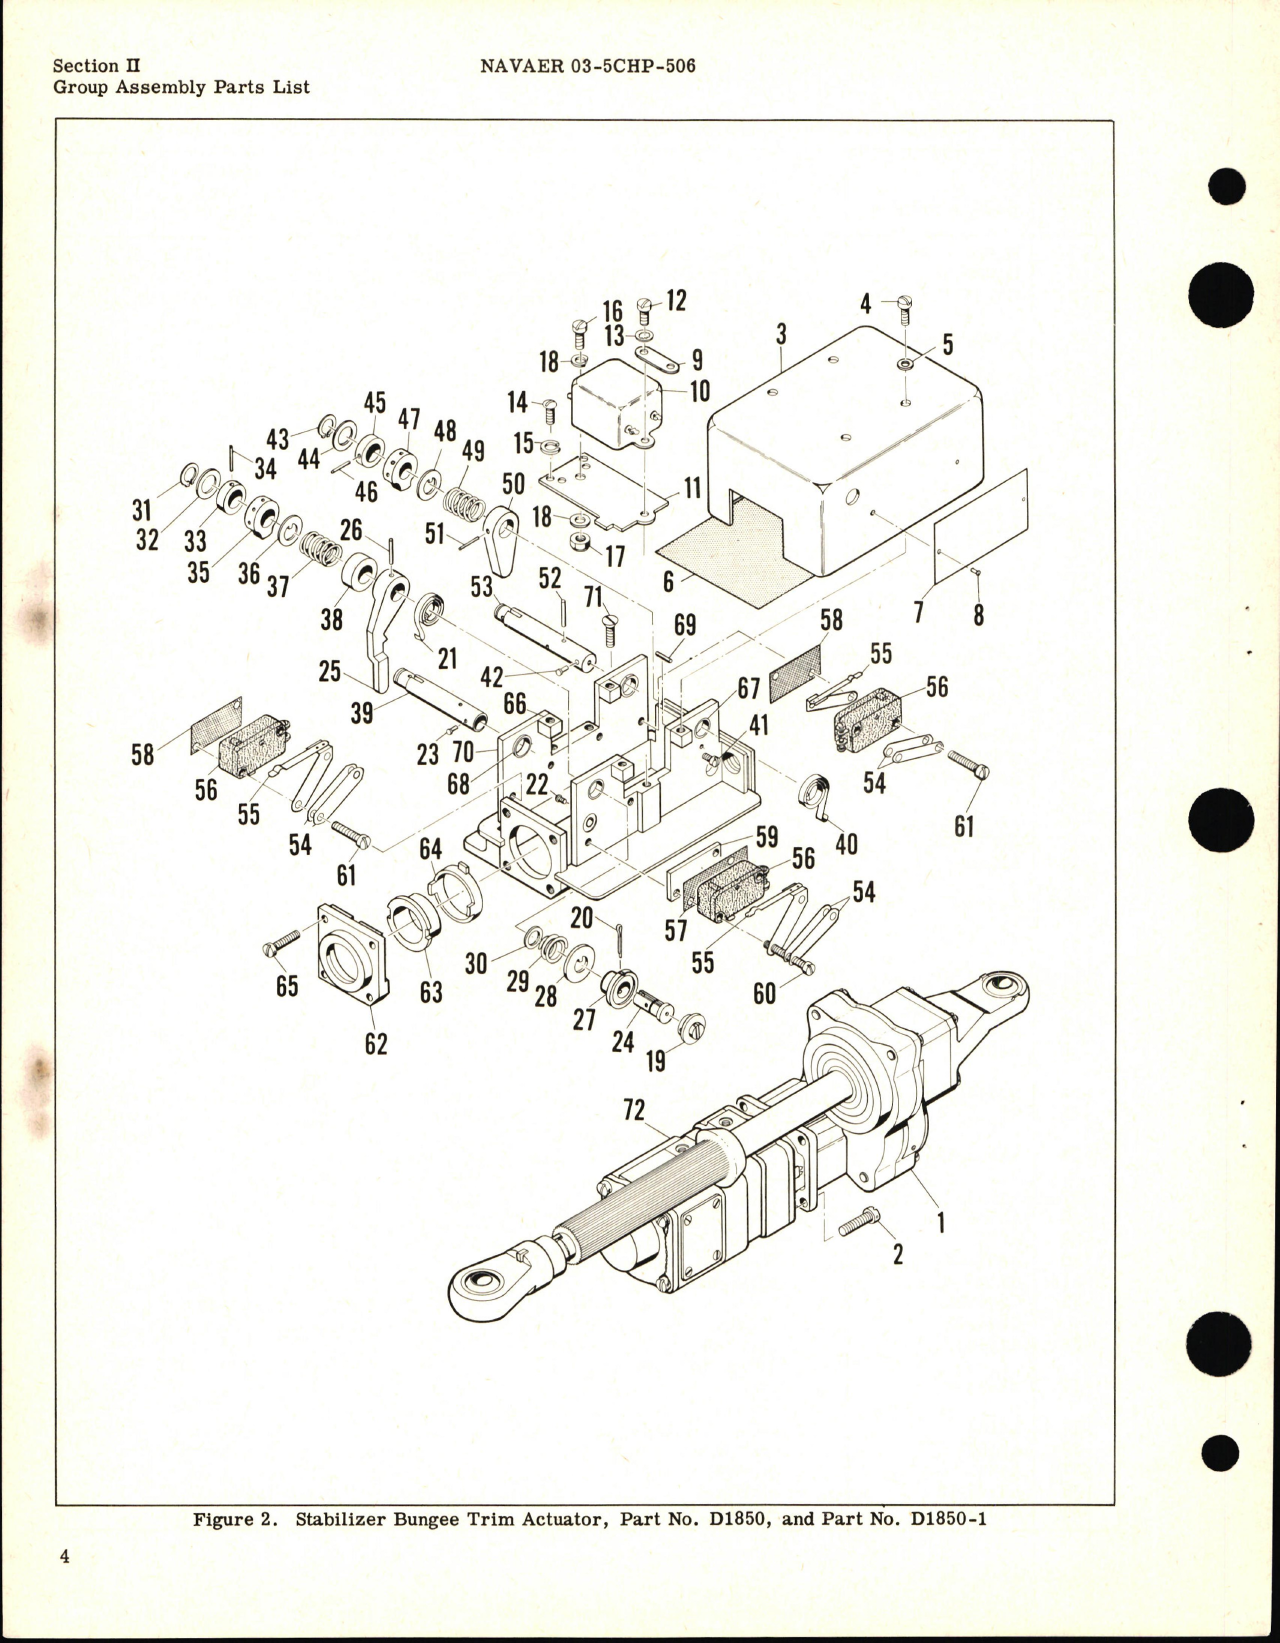 Sample page 6 from AirCorps Library document: Illustrated Parts Breakdown for Stabilizer Bungee Trim Actuator Part D1850 and D1850-1